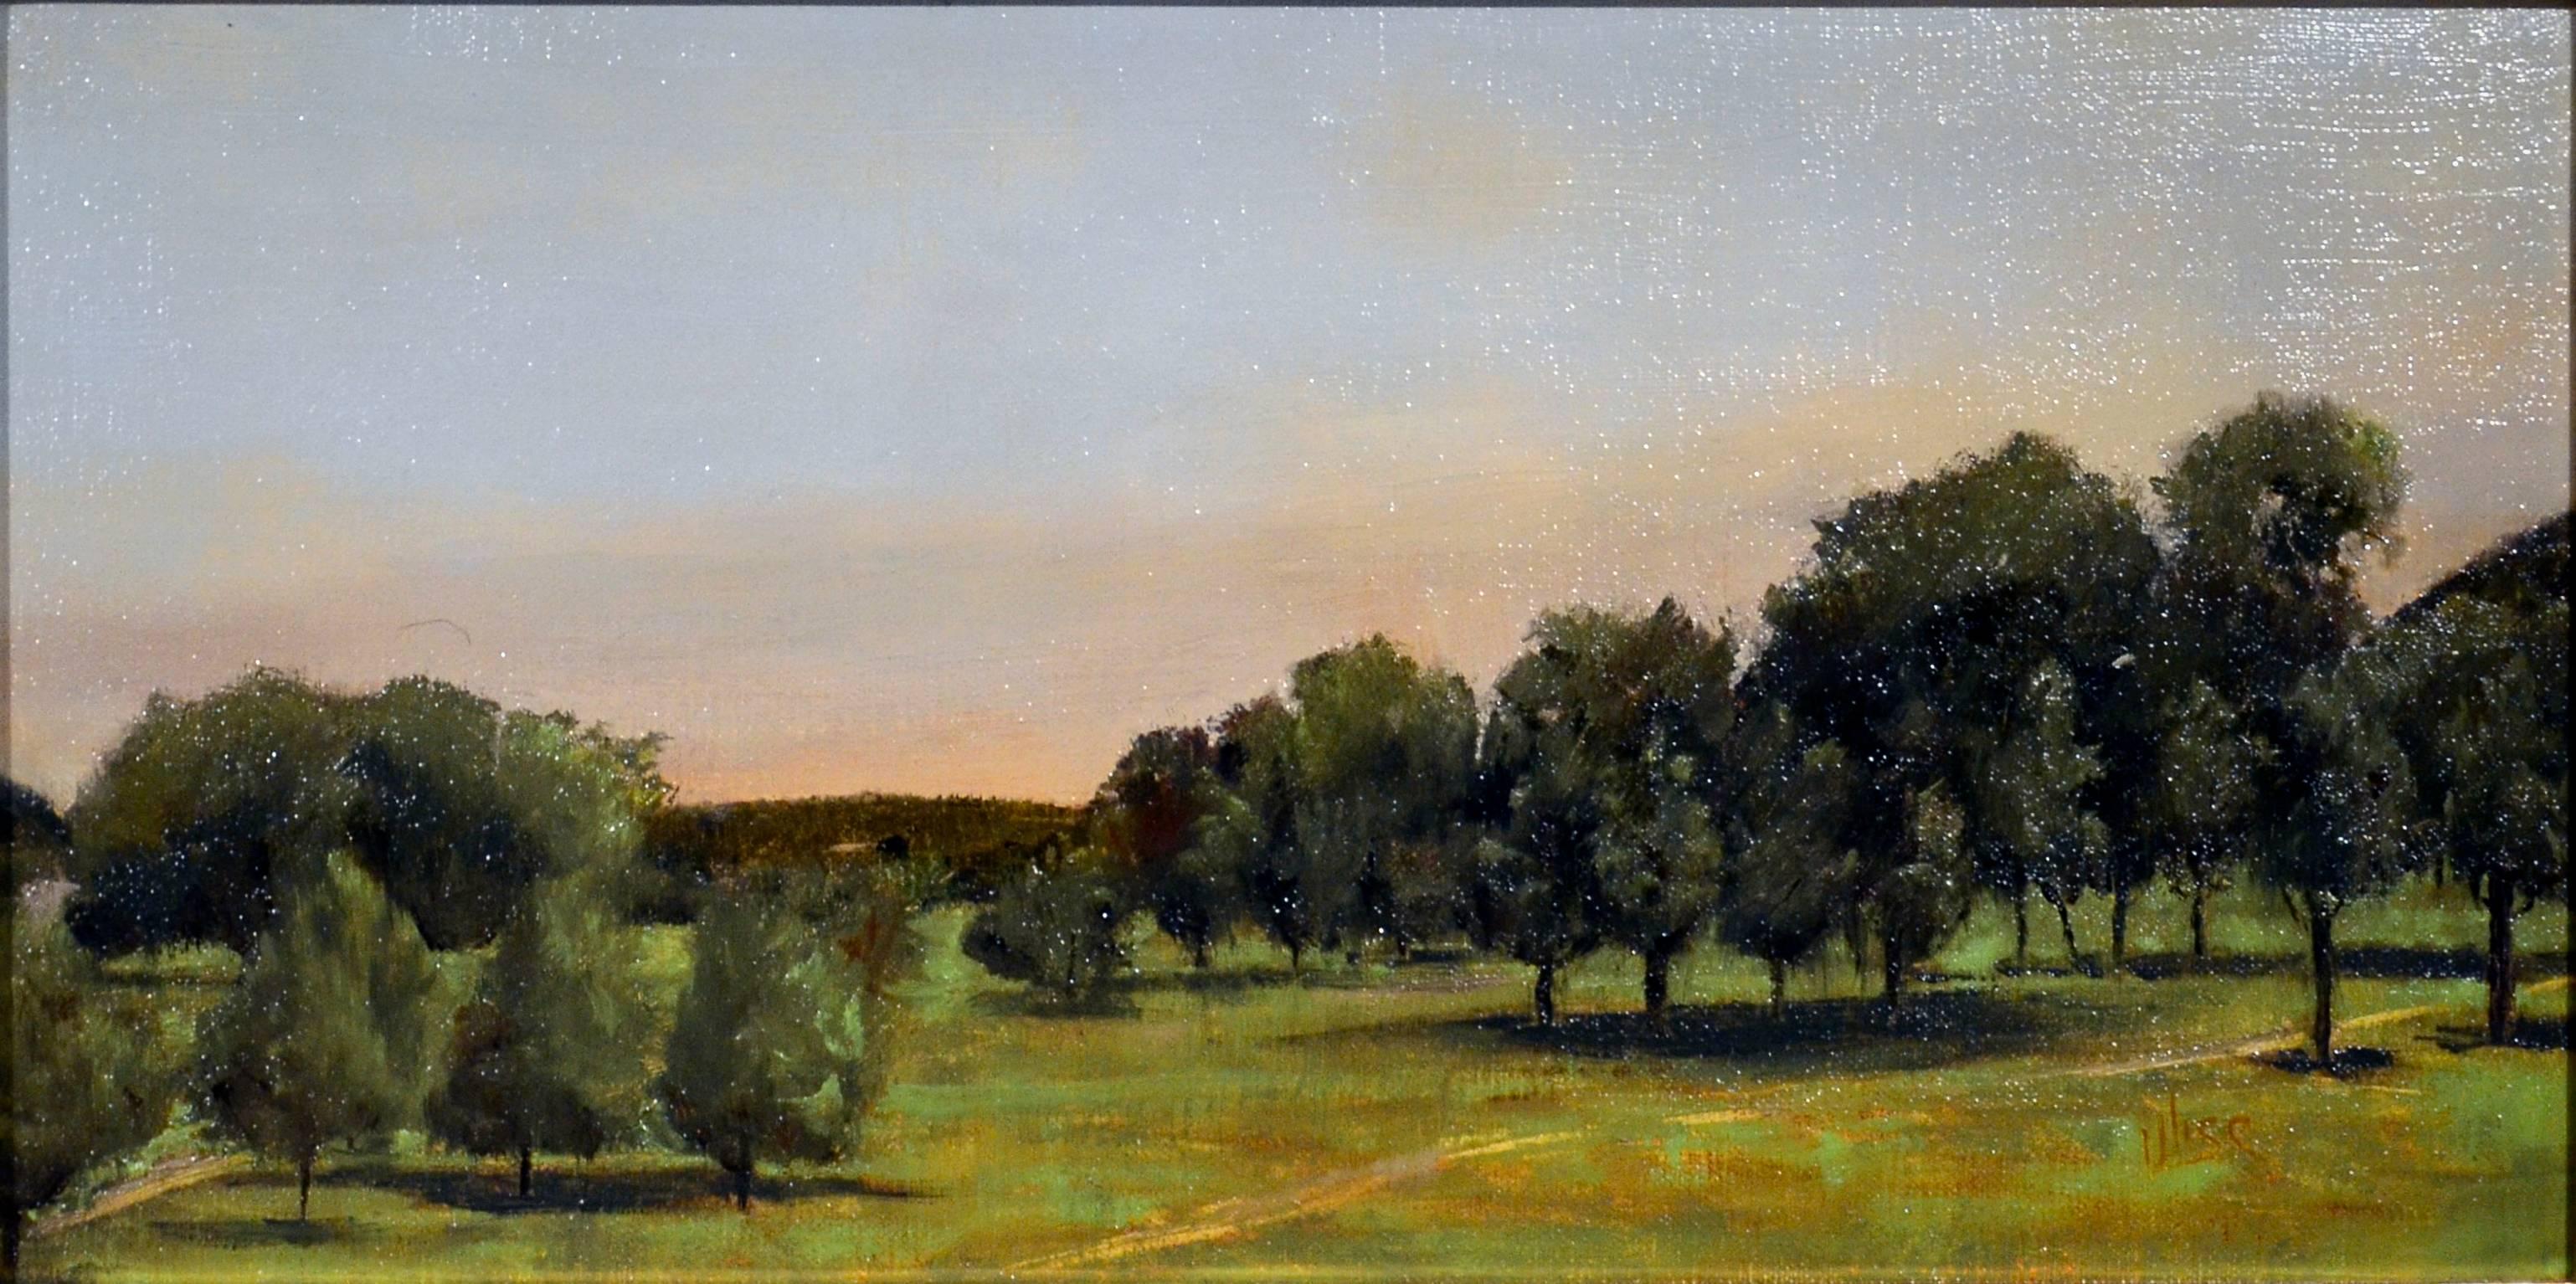 Marie Figge Wise Landscape Painting - Fore (landscape, trees, green)